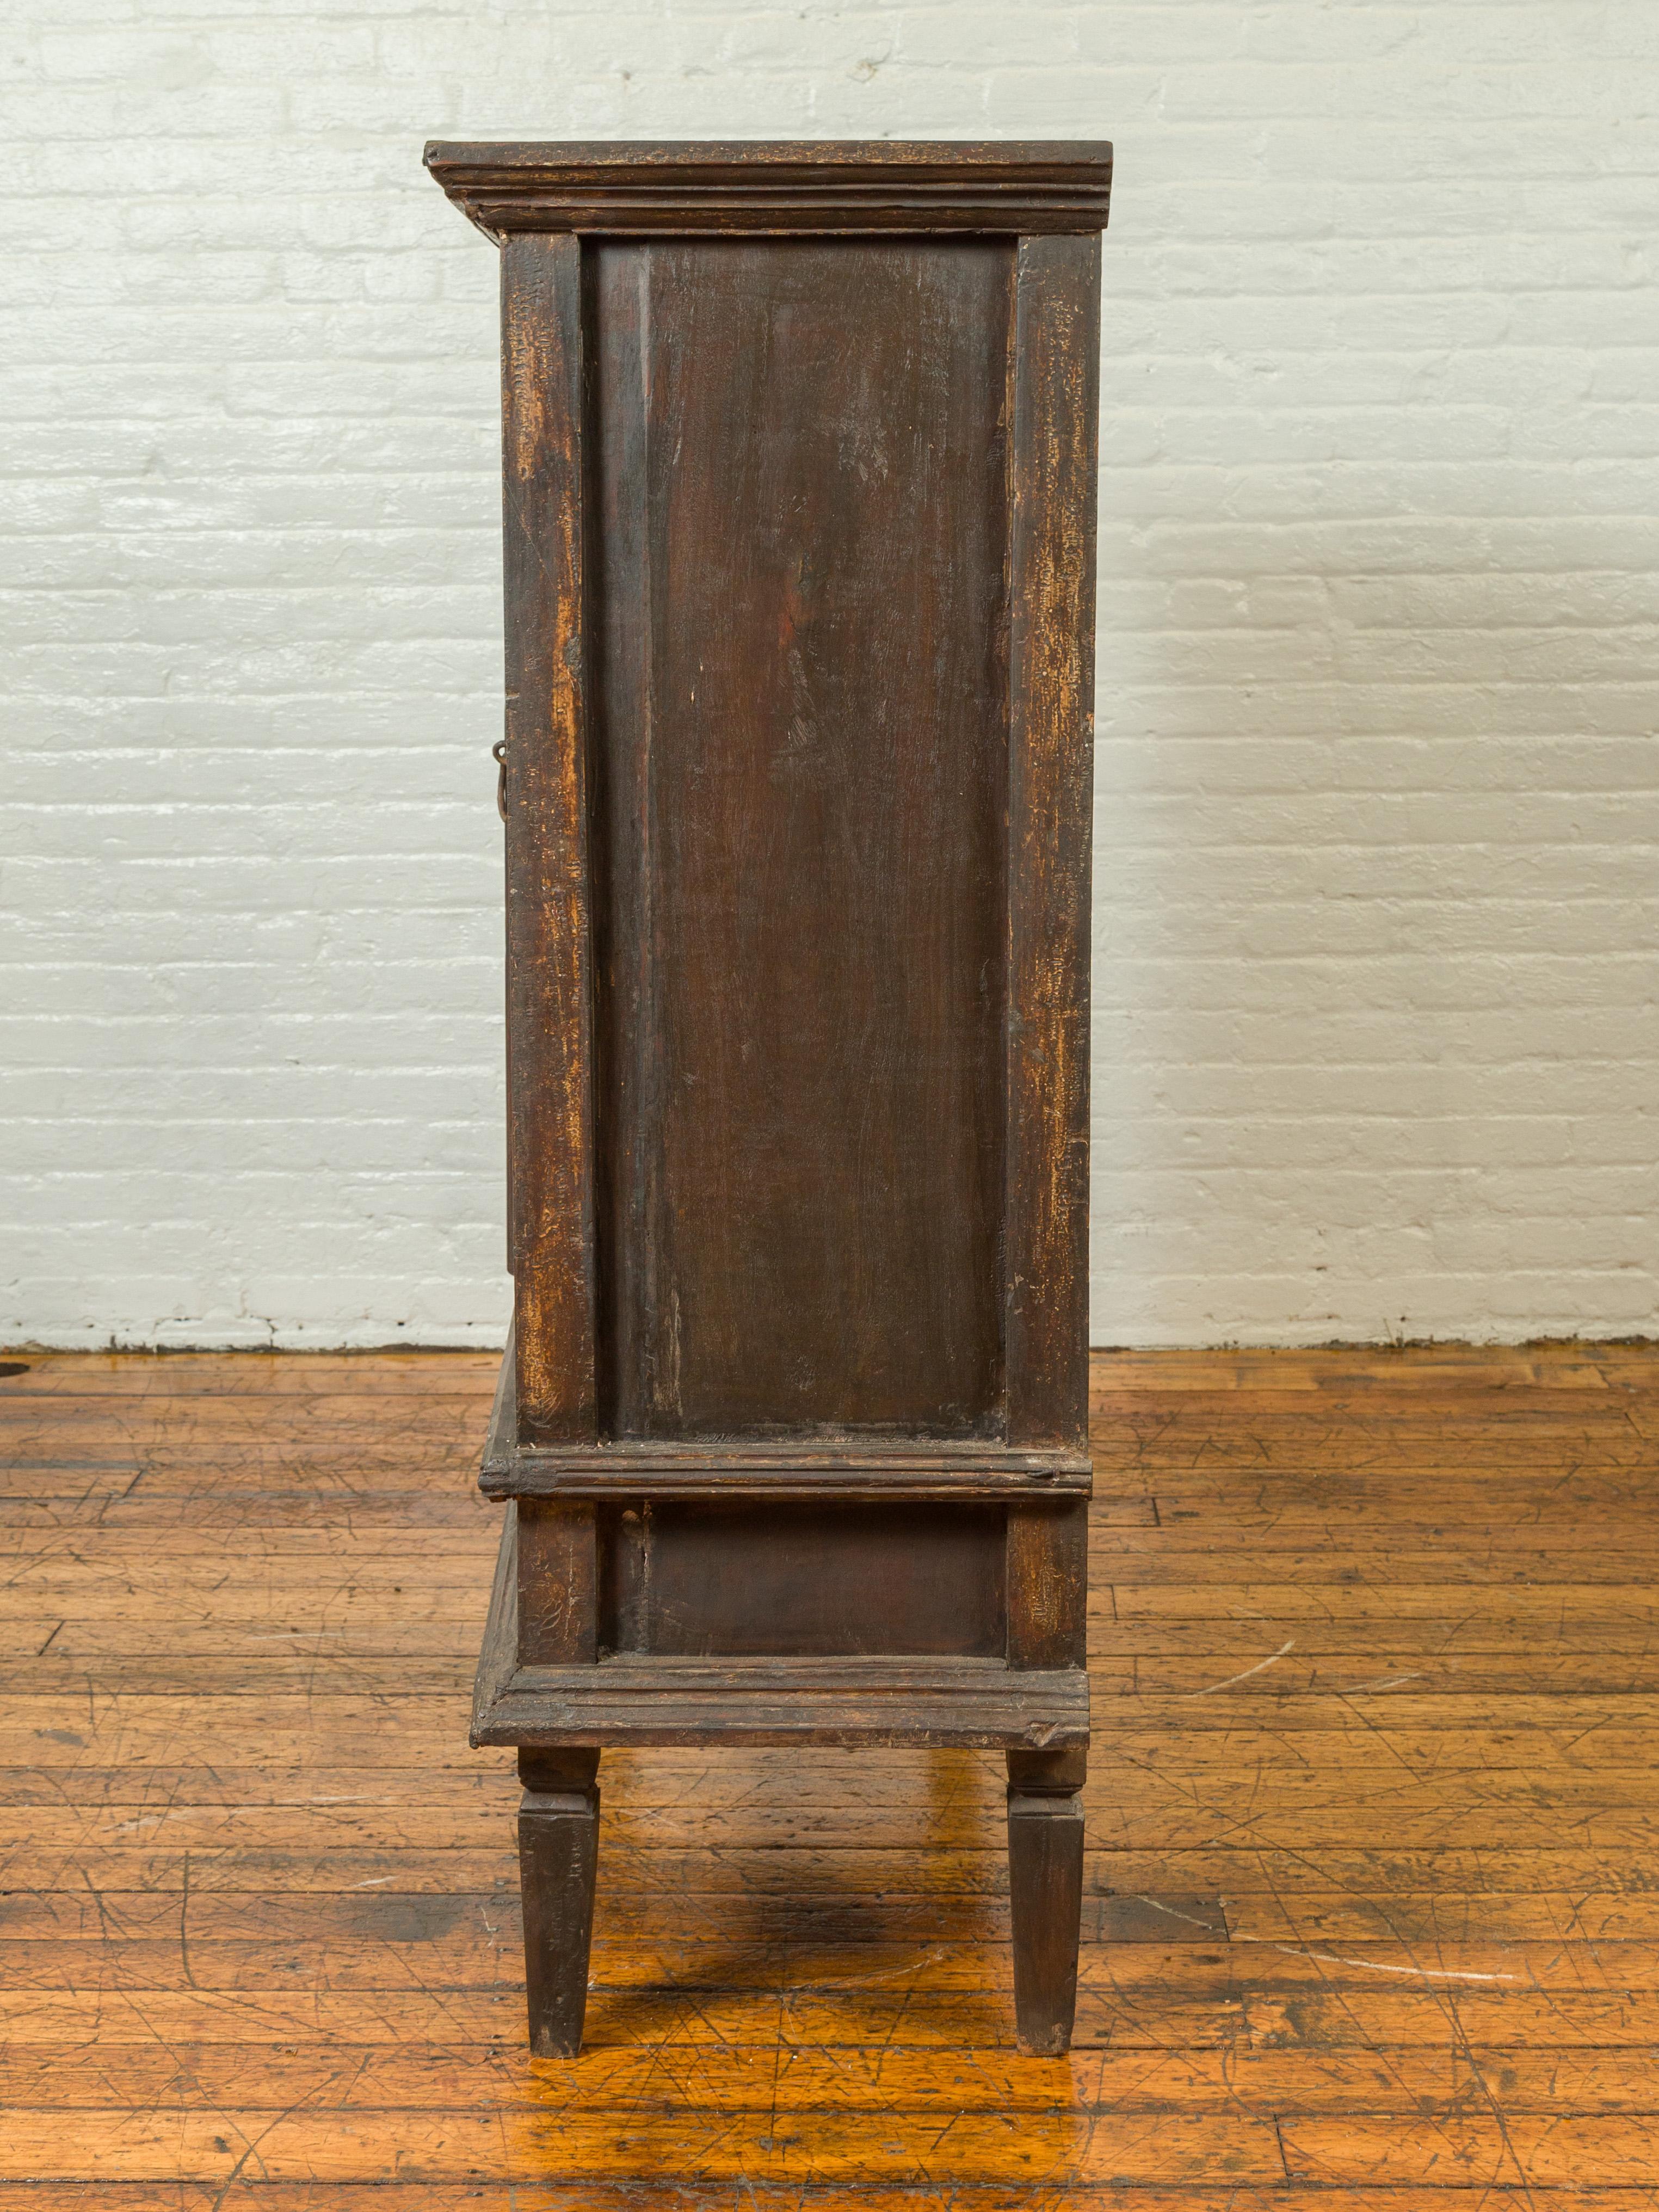 19th Century Indonesian Wooden Cabinet with Doors, Drawers and Carved Medallions For Sale 7